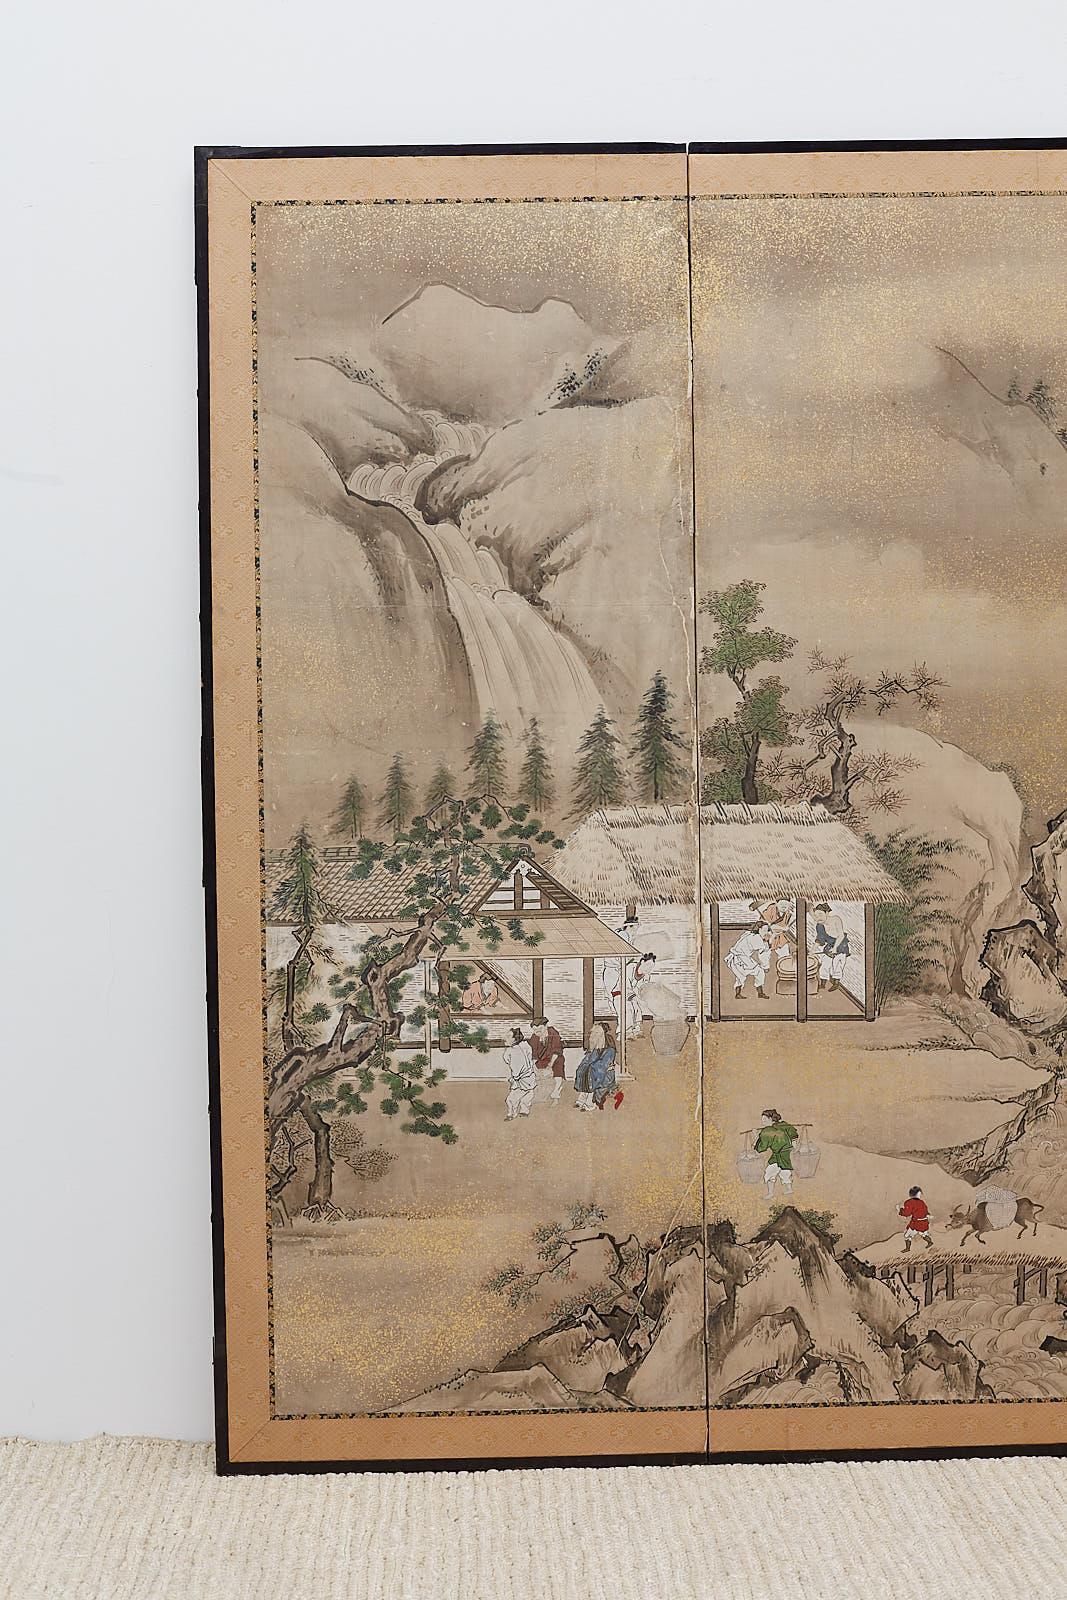 Hand-Crafted Japanese Edo Four-Panel Screen of Village Life